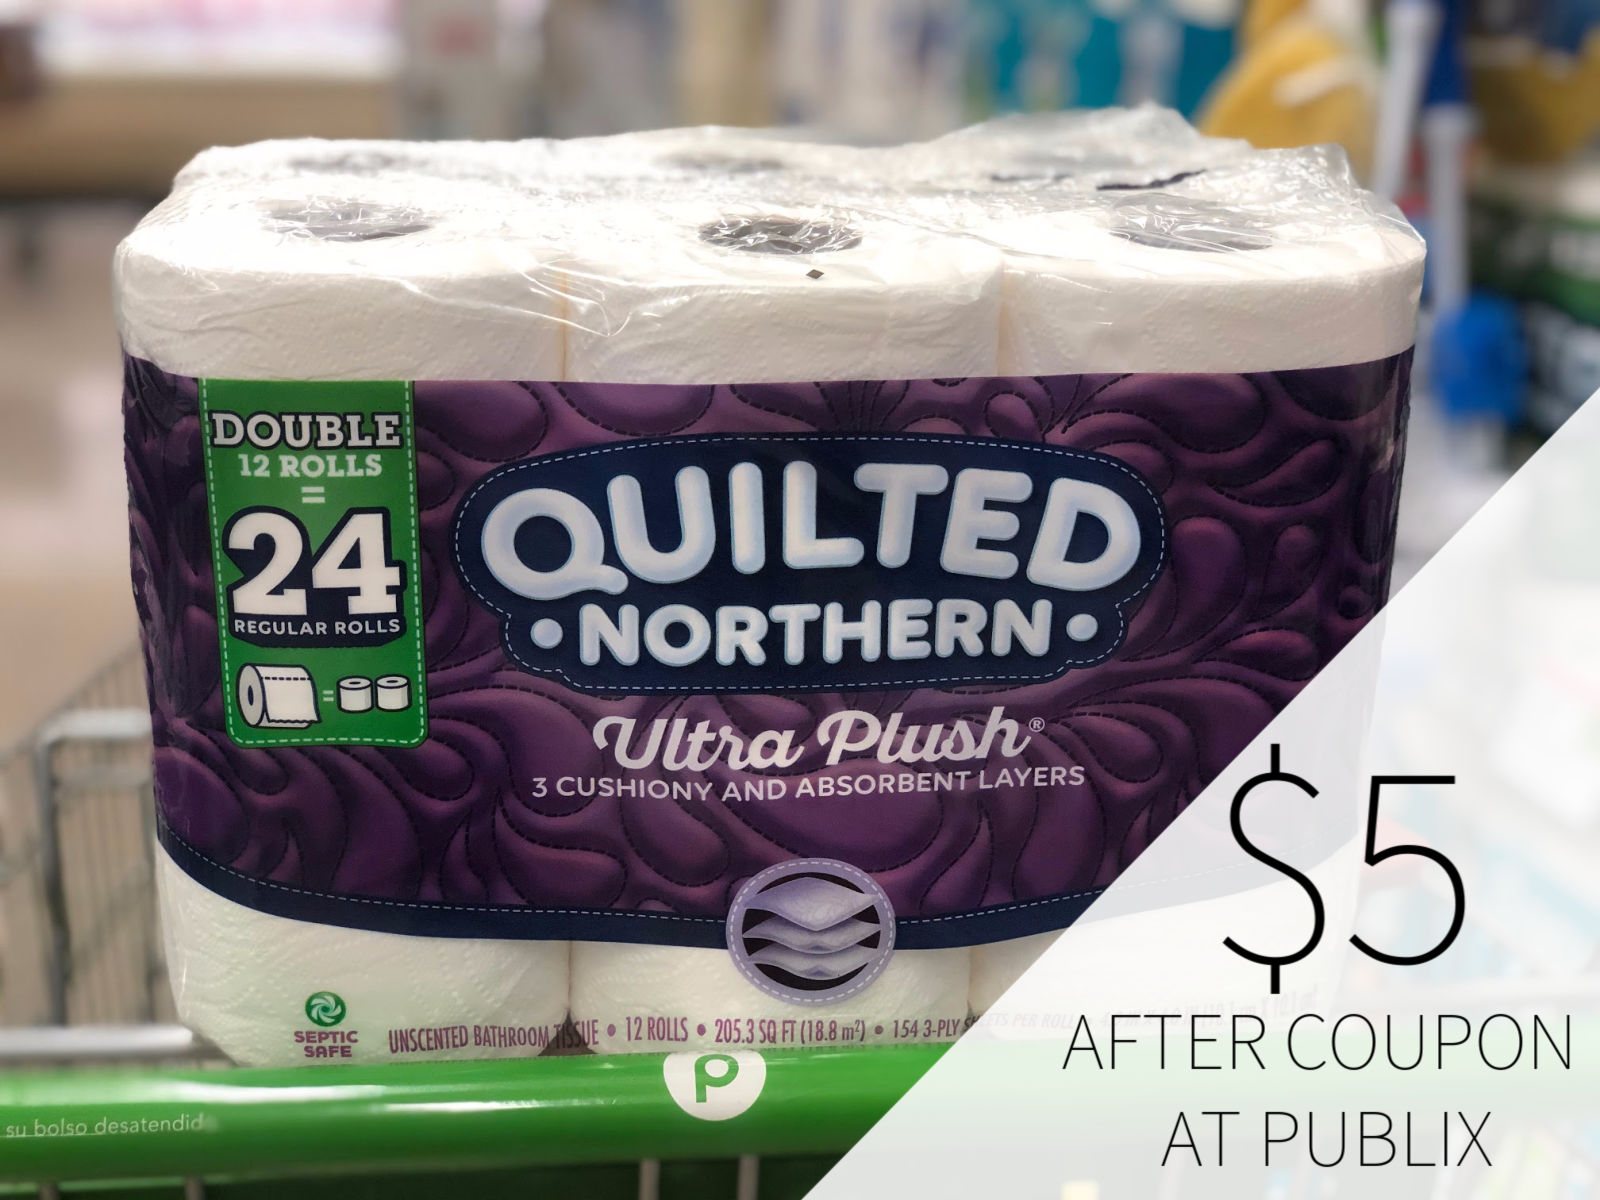 Reminder Stock Up On Quilted Northern® Bathroom Tissue – As Low As $5 Right Now At Publix